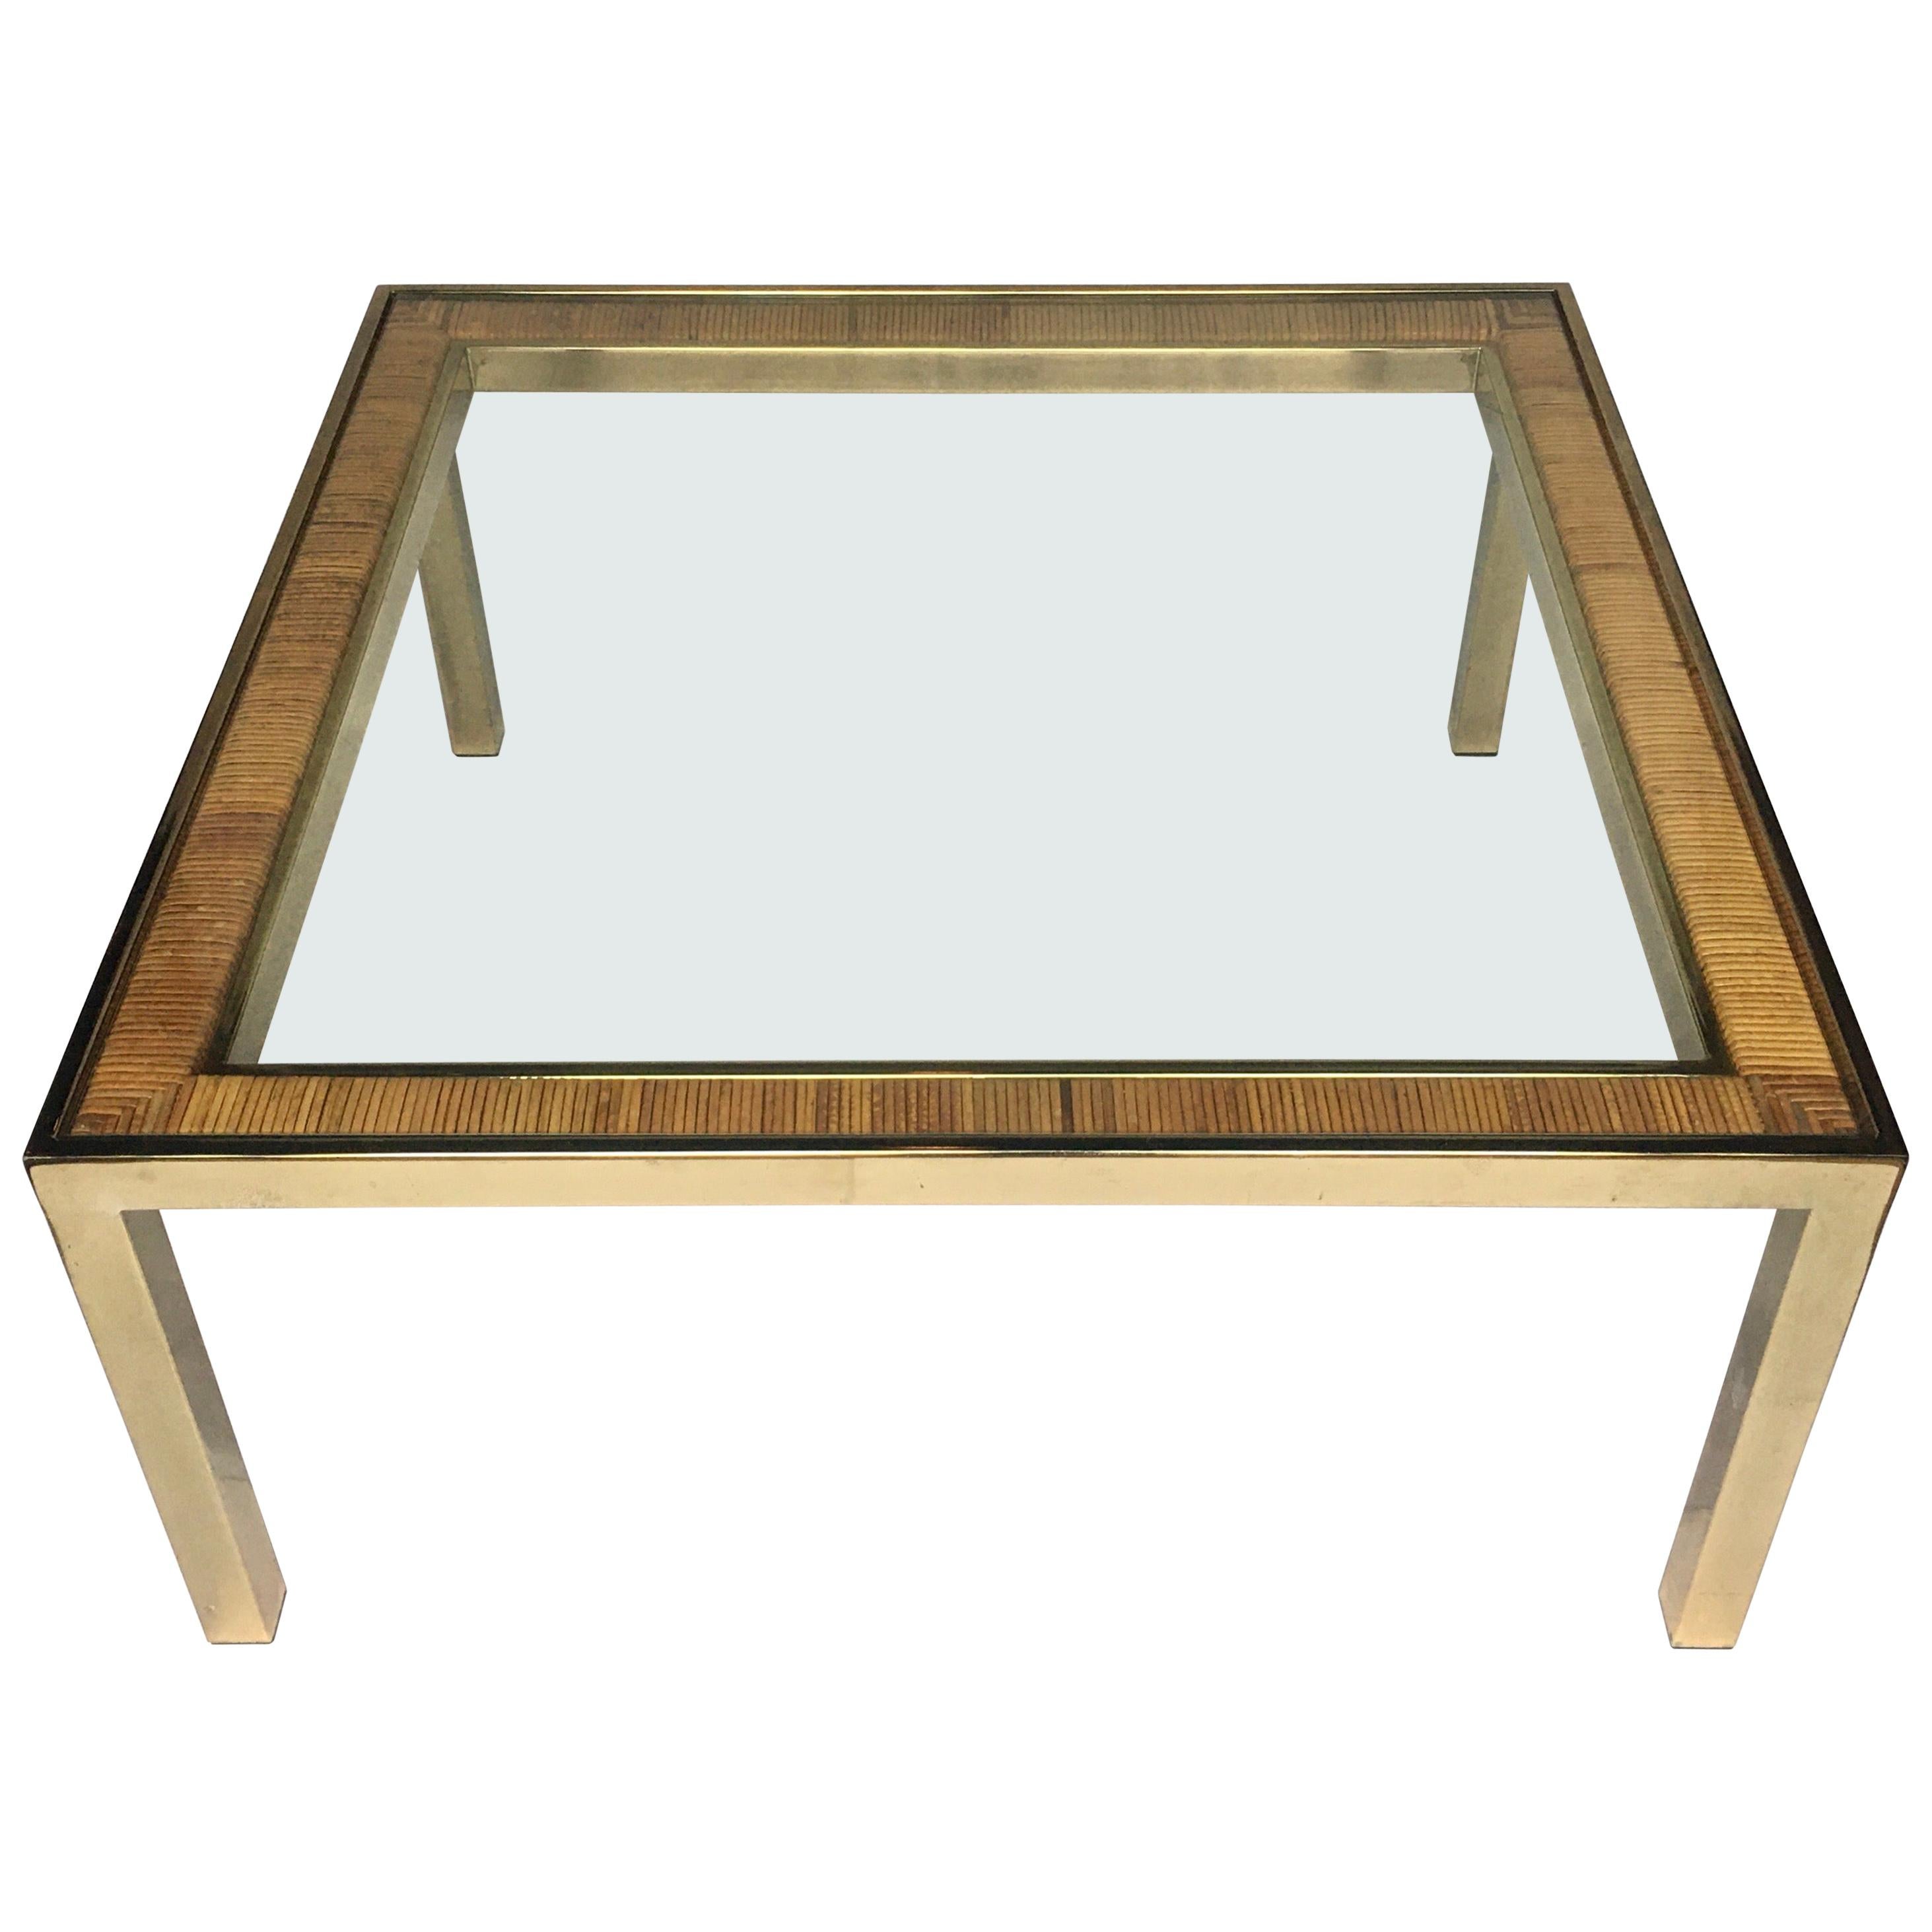 Mid-Century Modern Square Brass and Rattan Coffee Table, Milo Baughman DIA Style For Sale